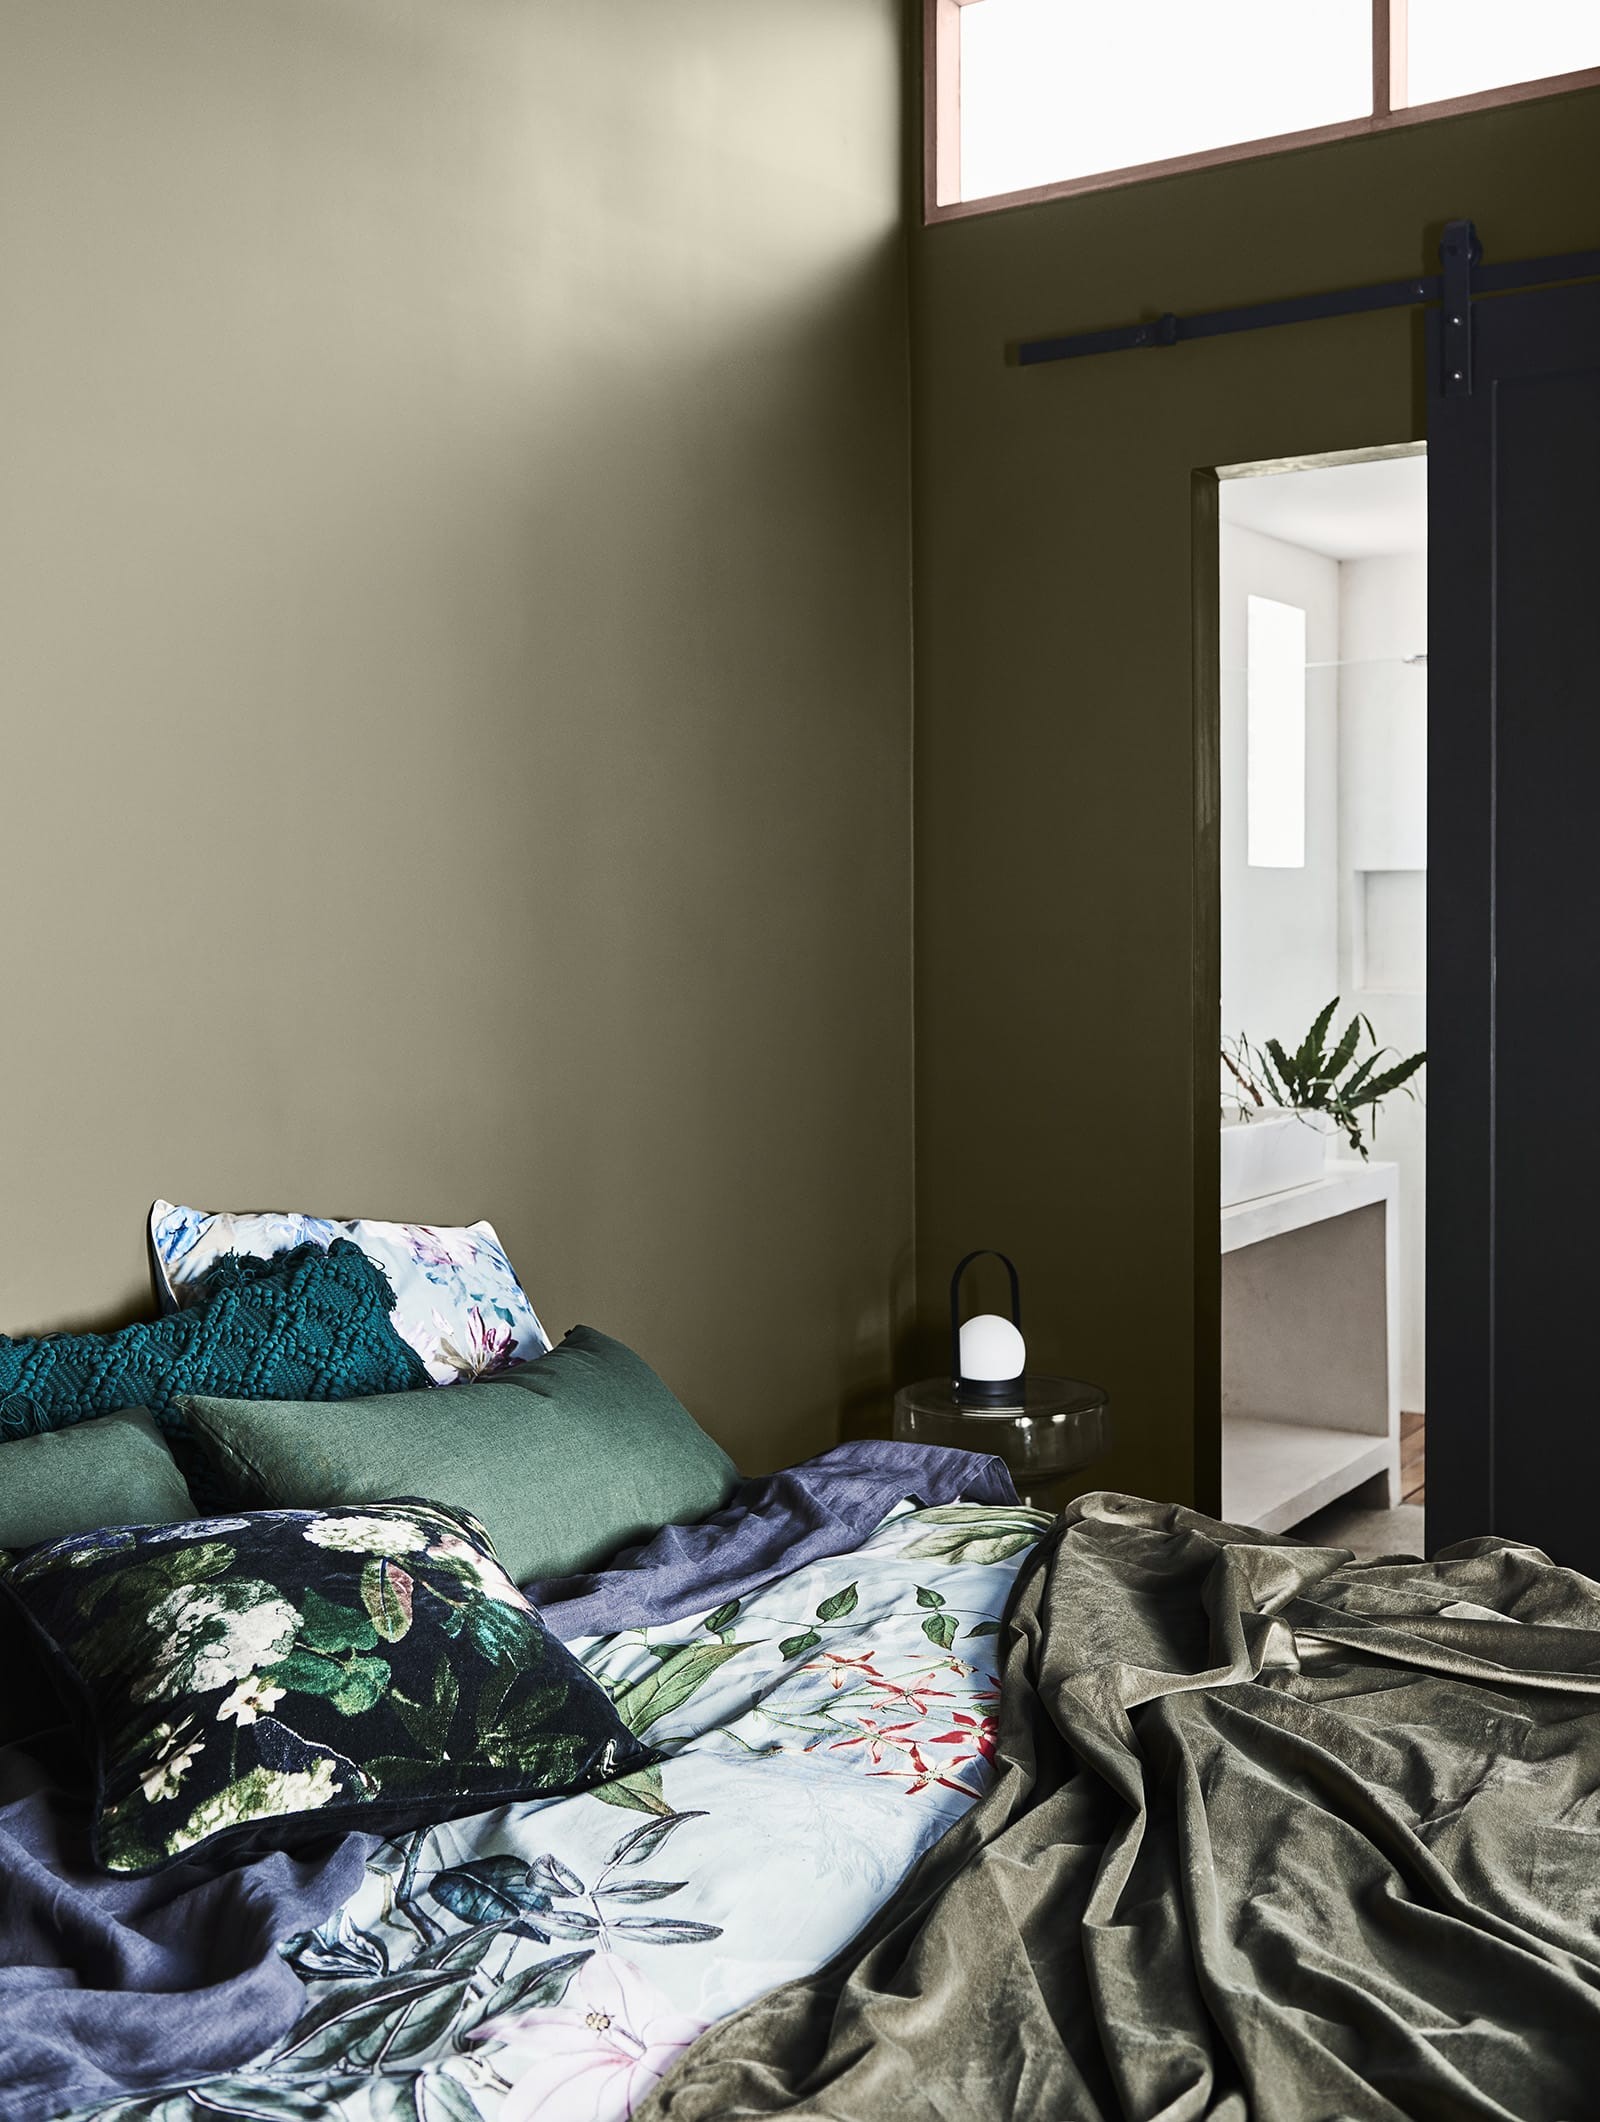 dulux army green bedroom walls with green botanical bedding set